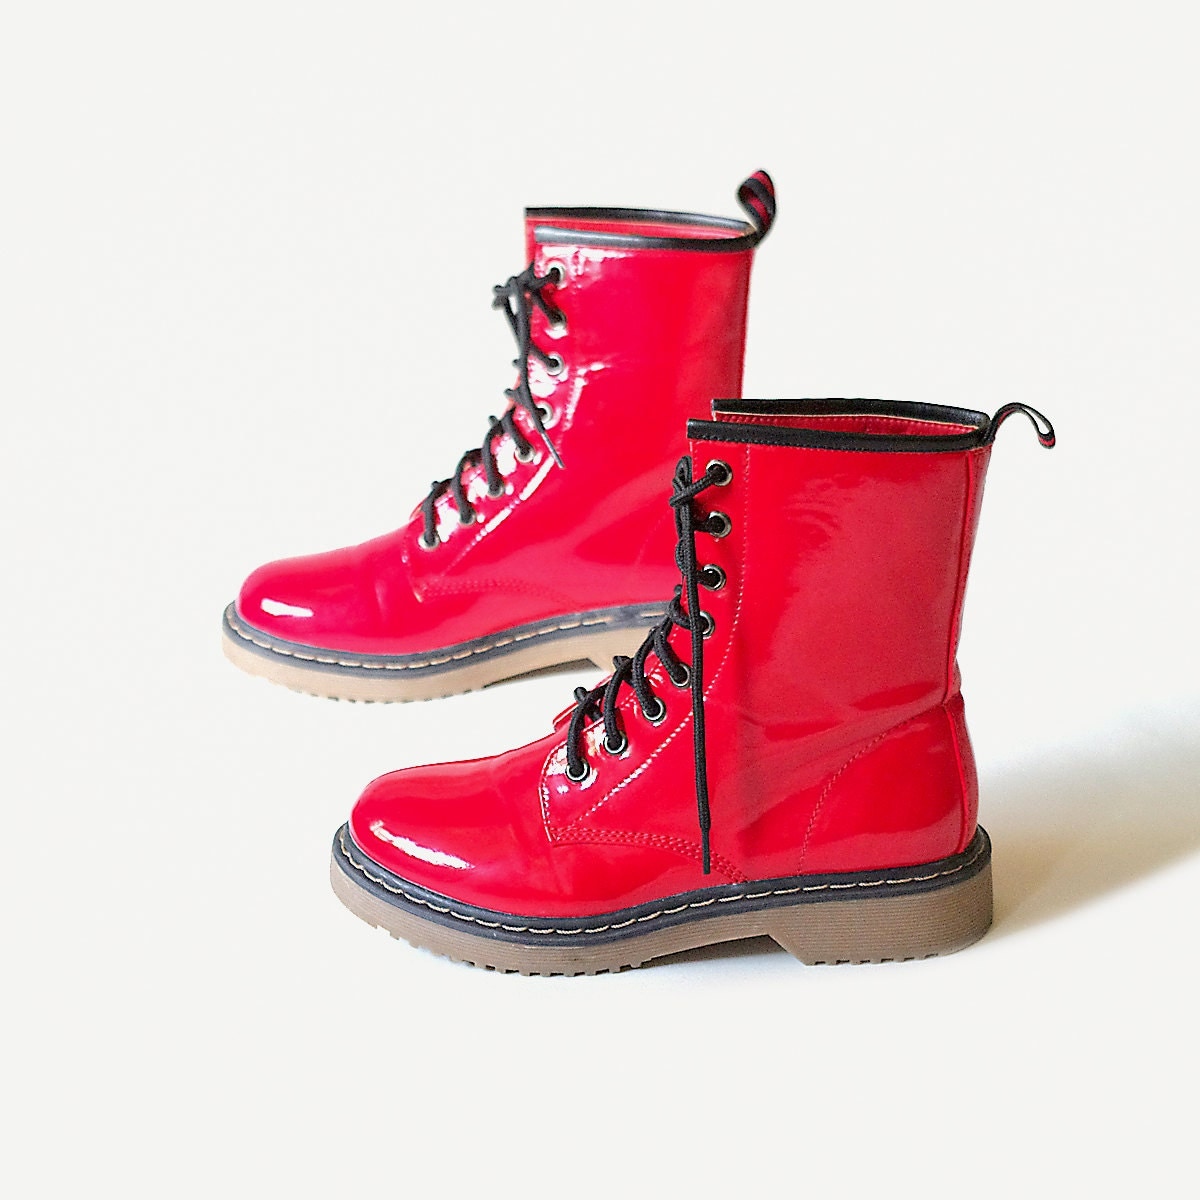 red lace up combat boots patent leather candy color military